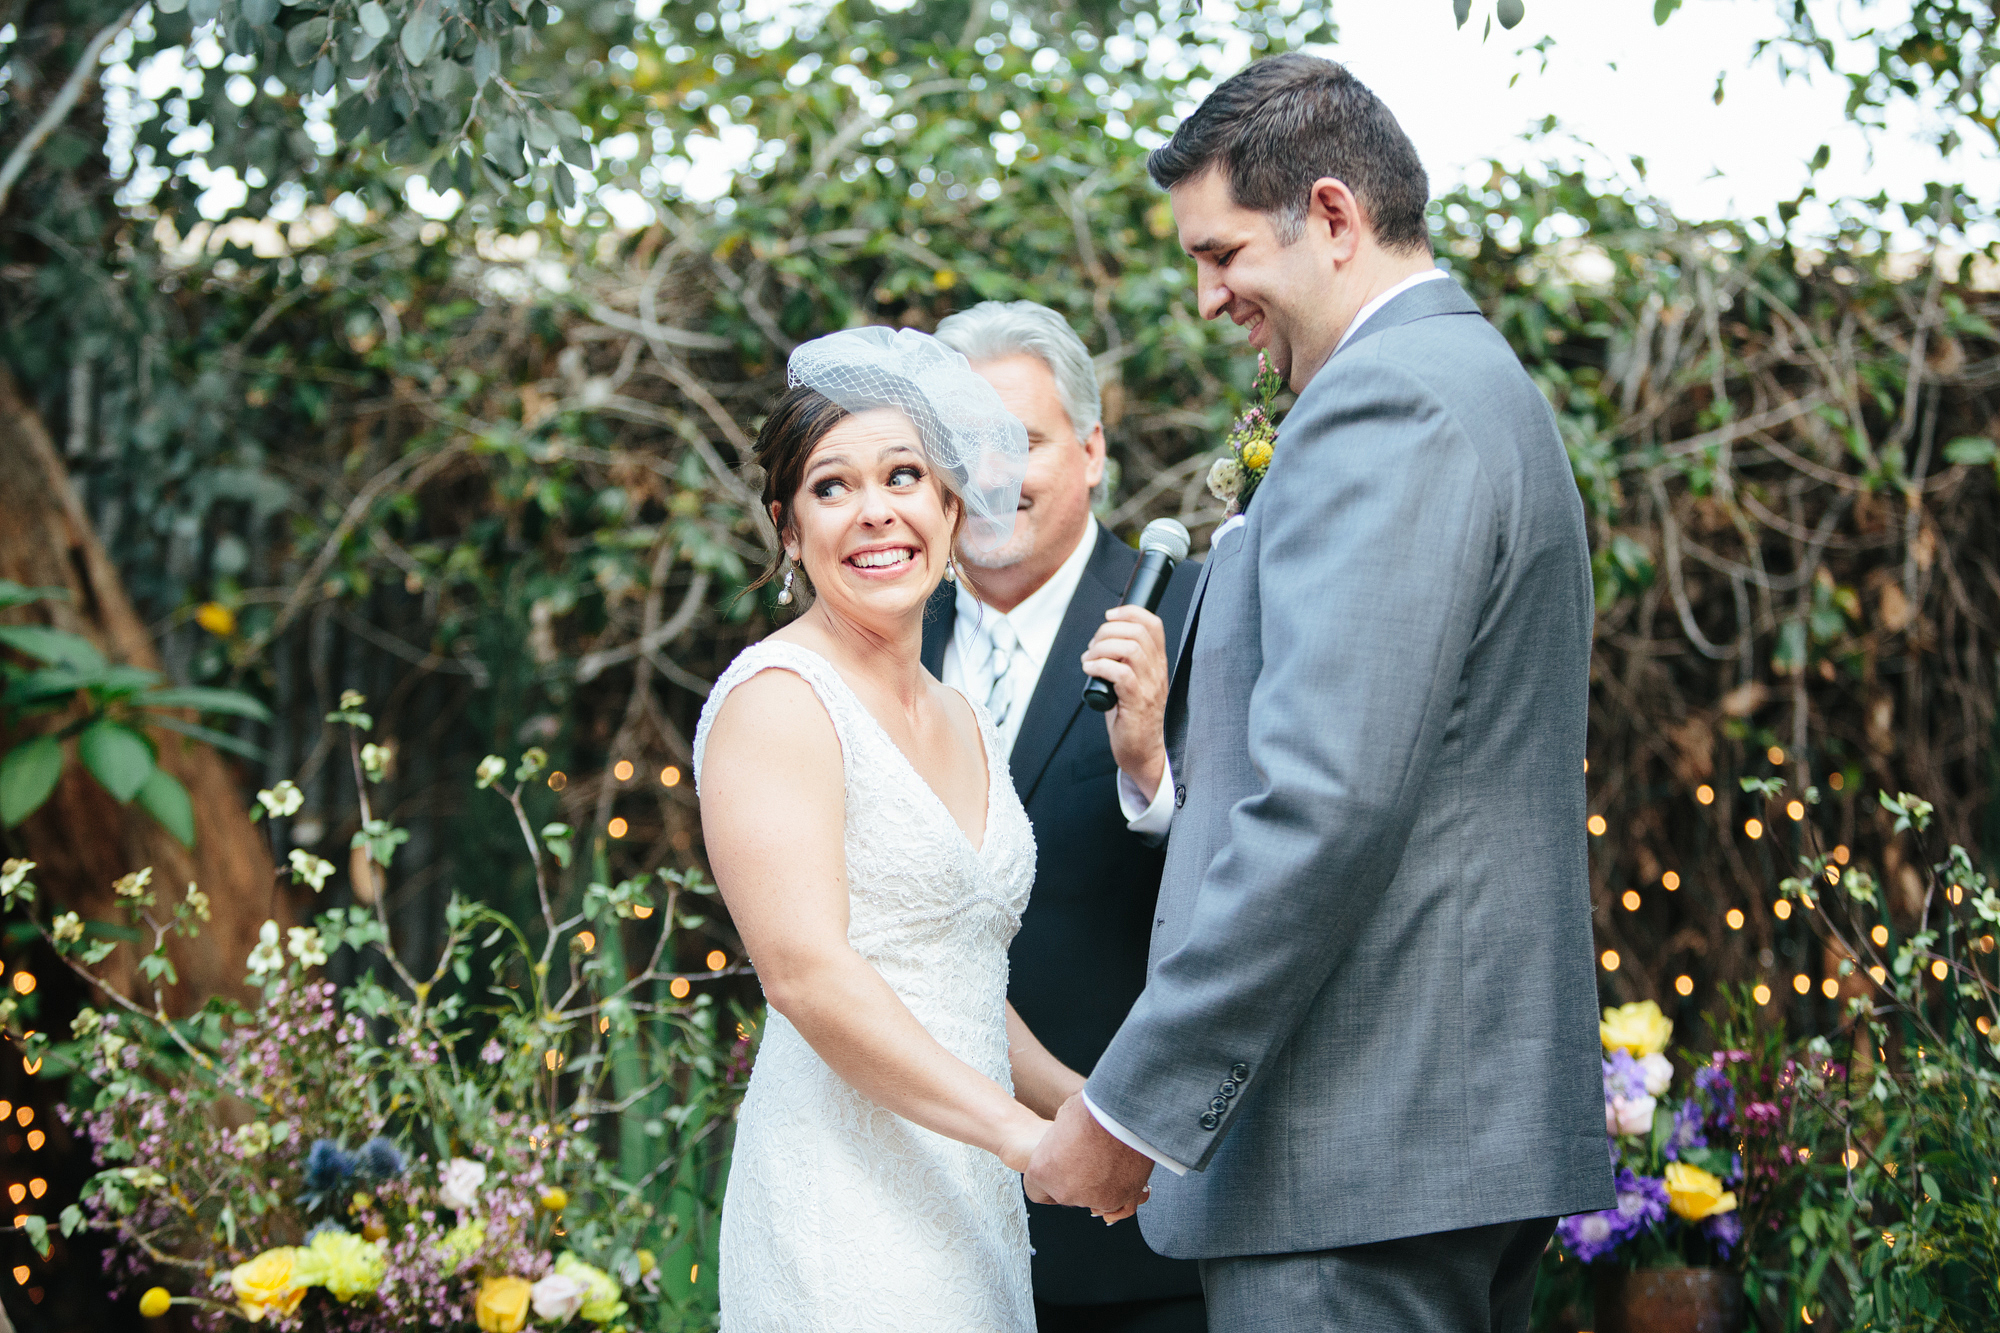 What a cute moment during Rachel and Seth's ceremony.